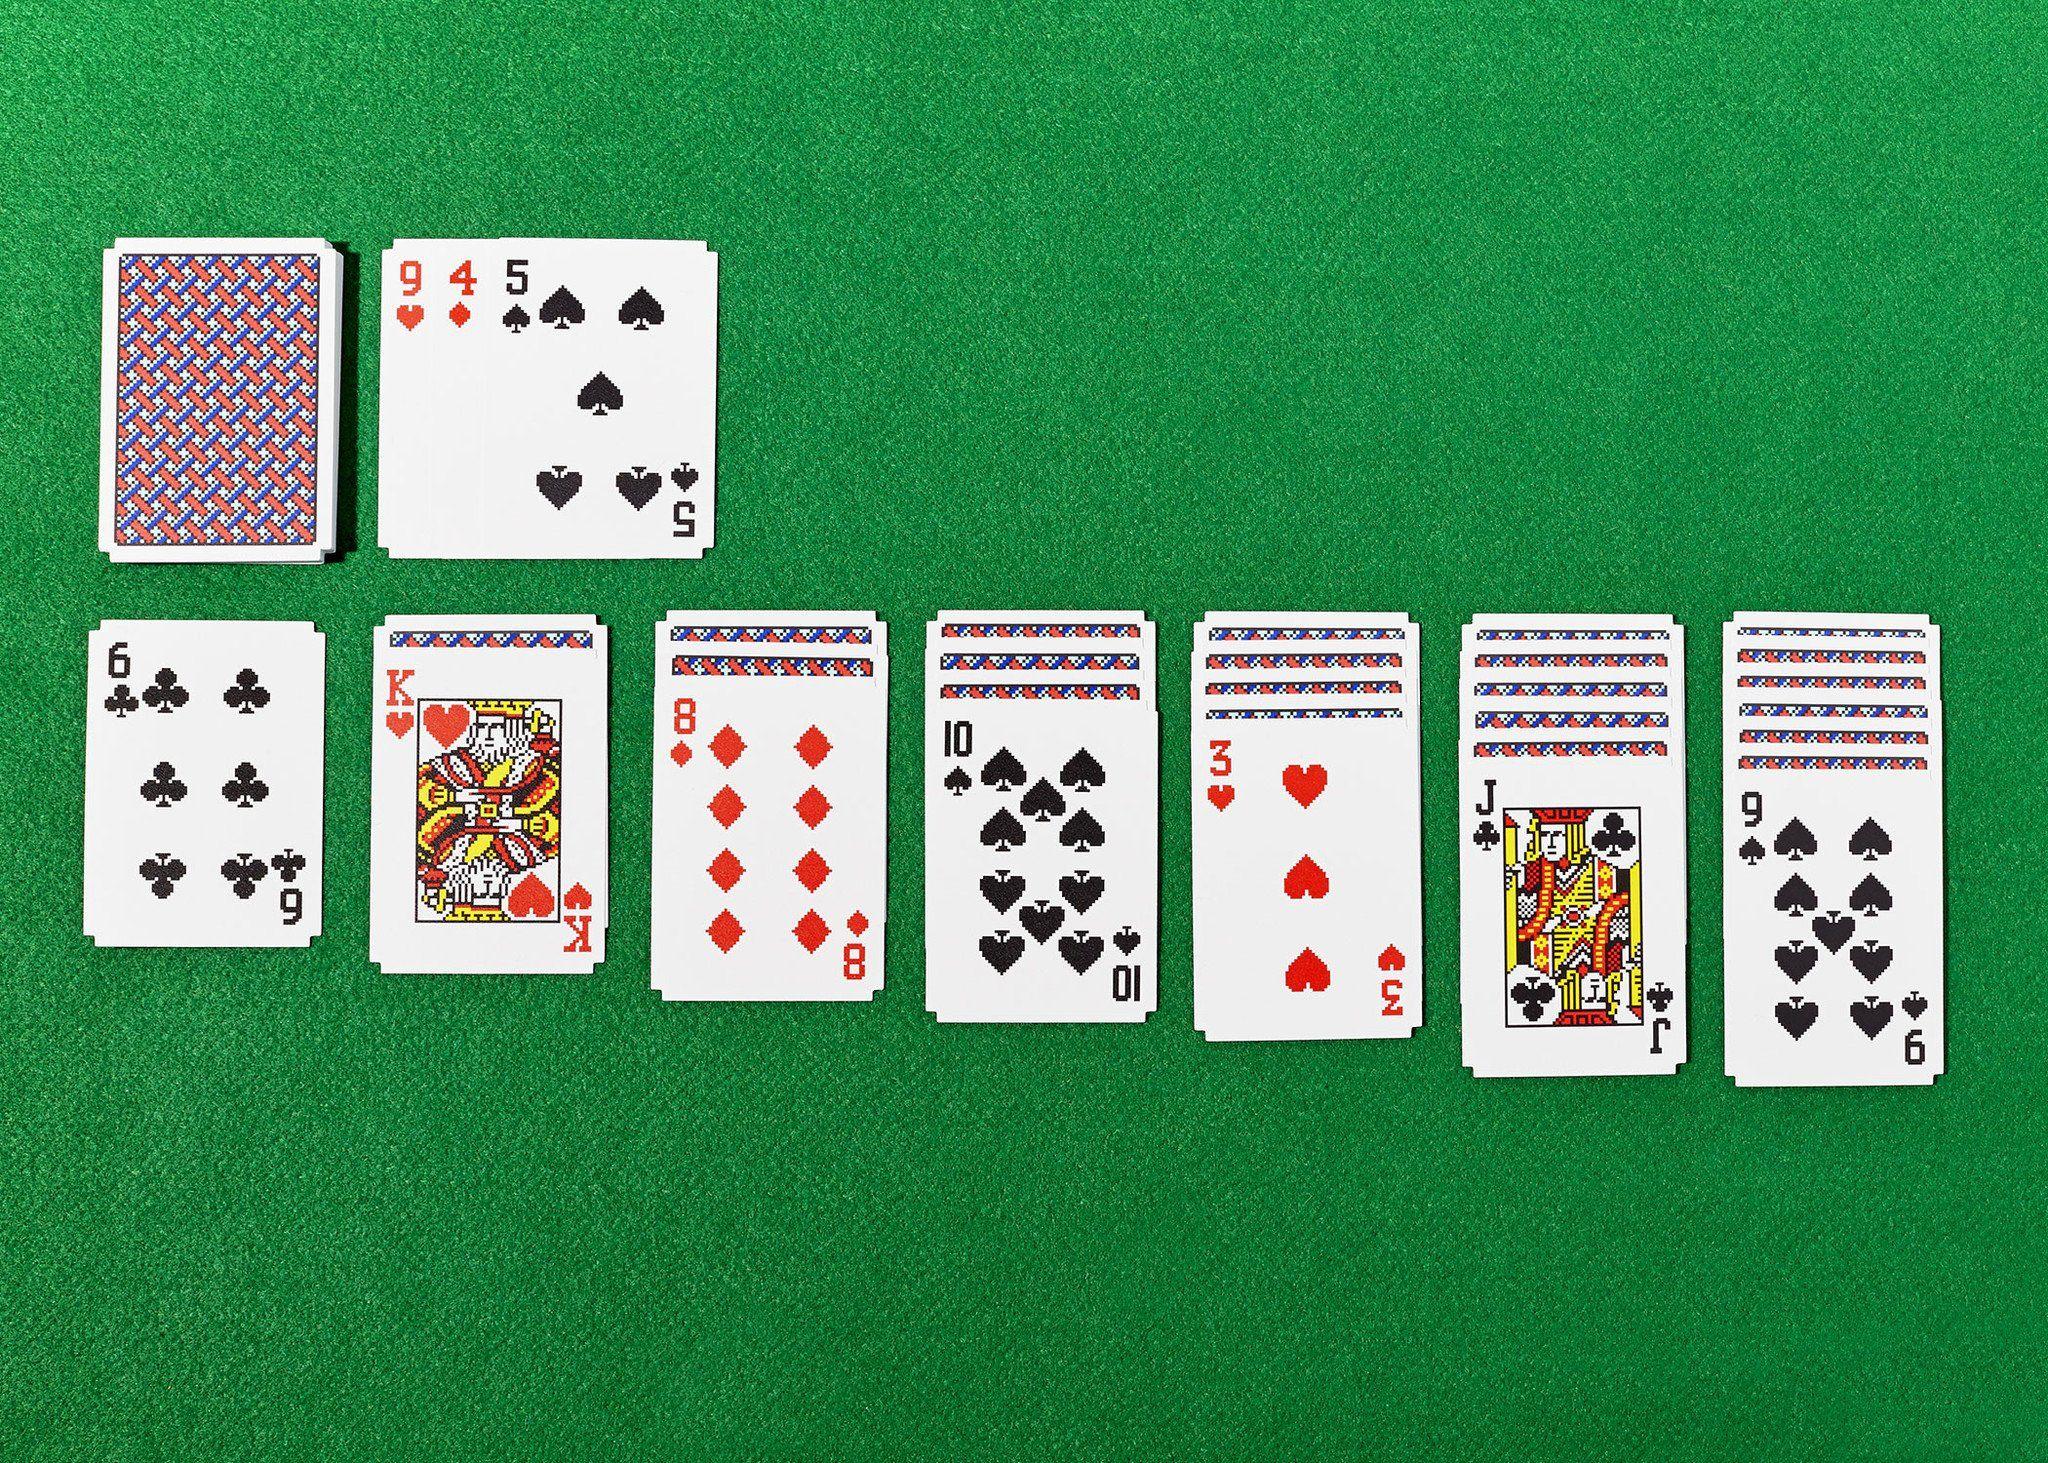 solitaire card game on line